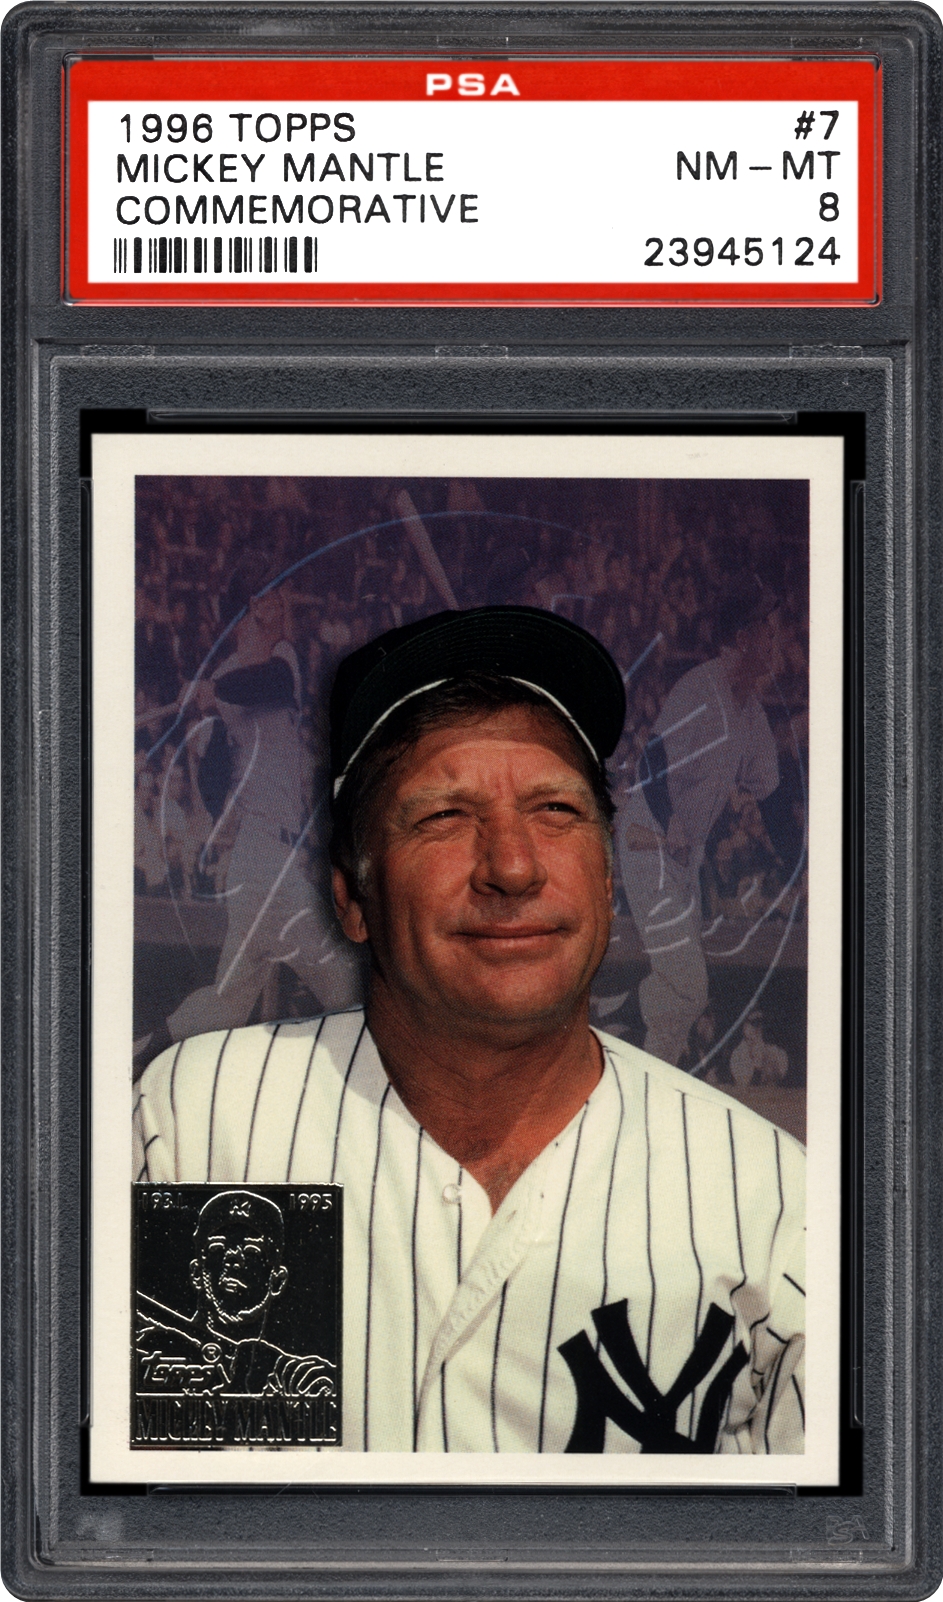 Mickey mantle topps card 1996